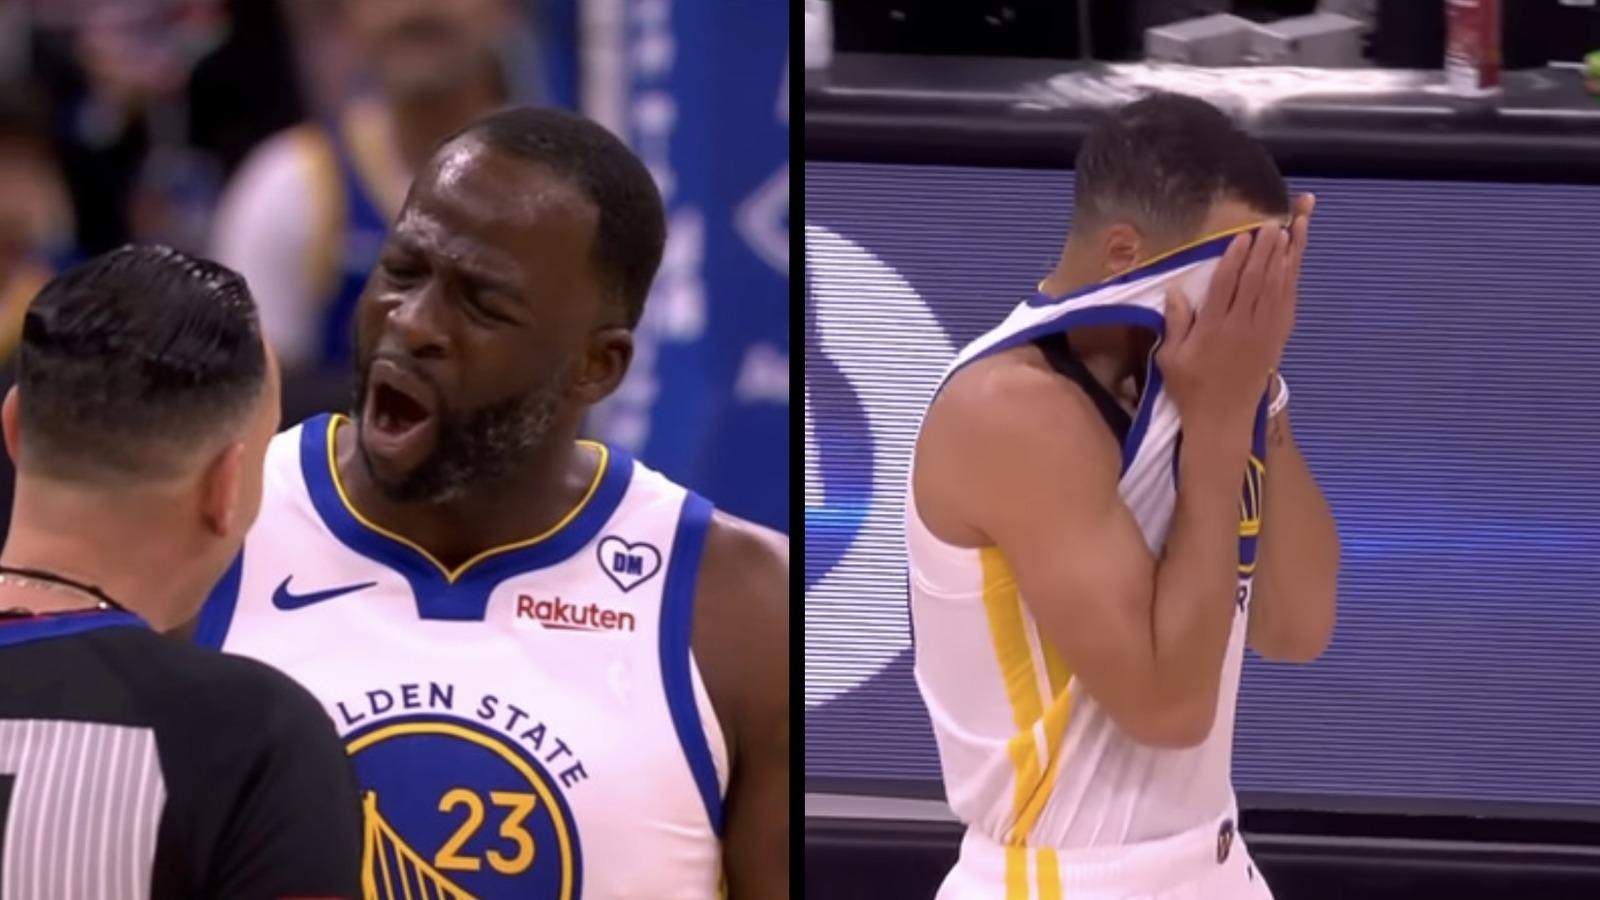 Draymond Green’s latest ejection catches heat as the Warriors’ playoff hopes hang in the balance.